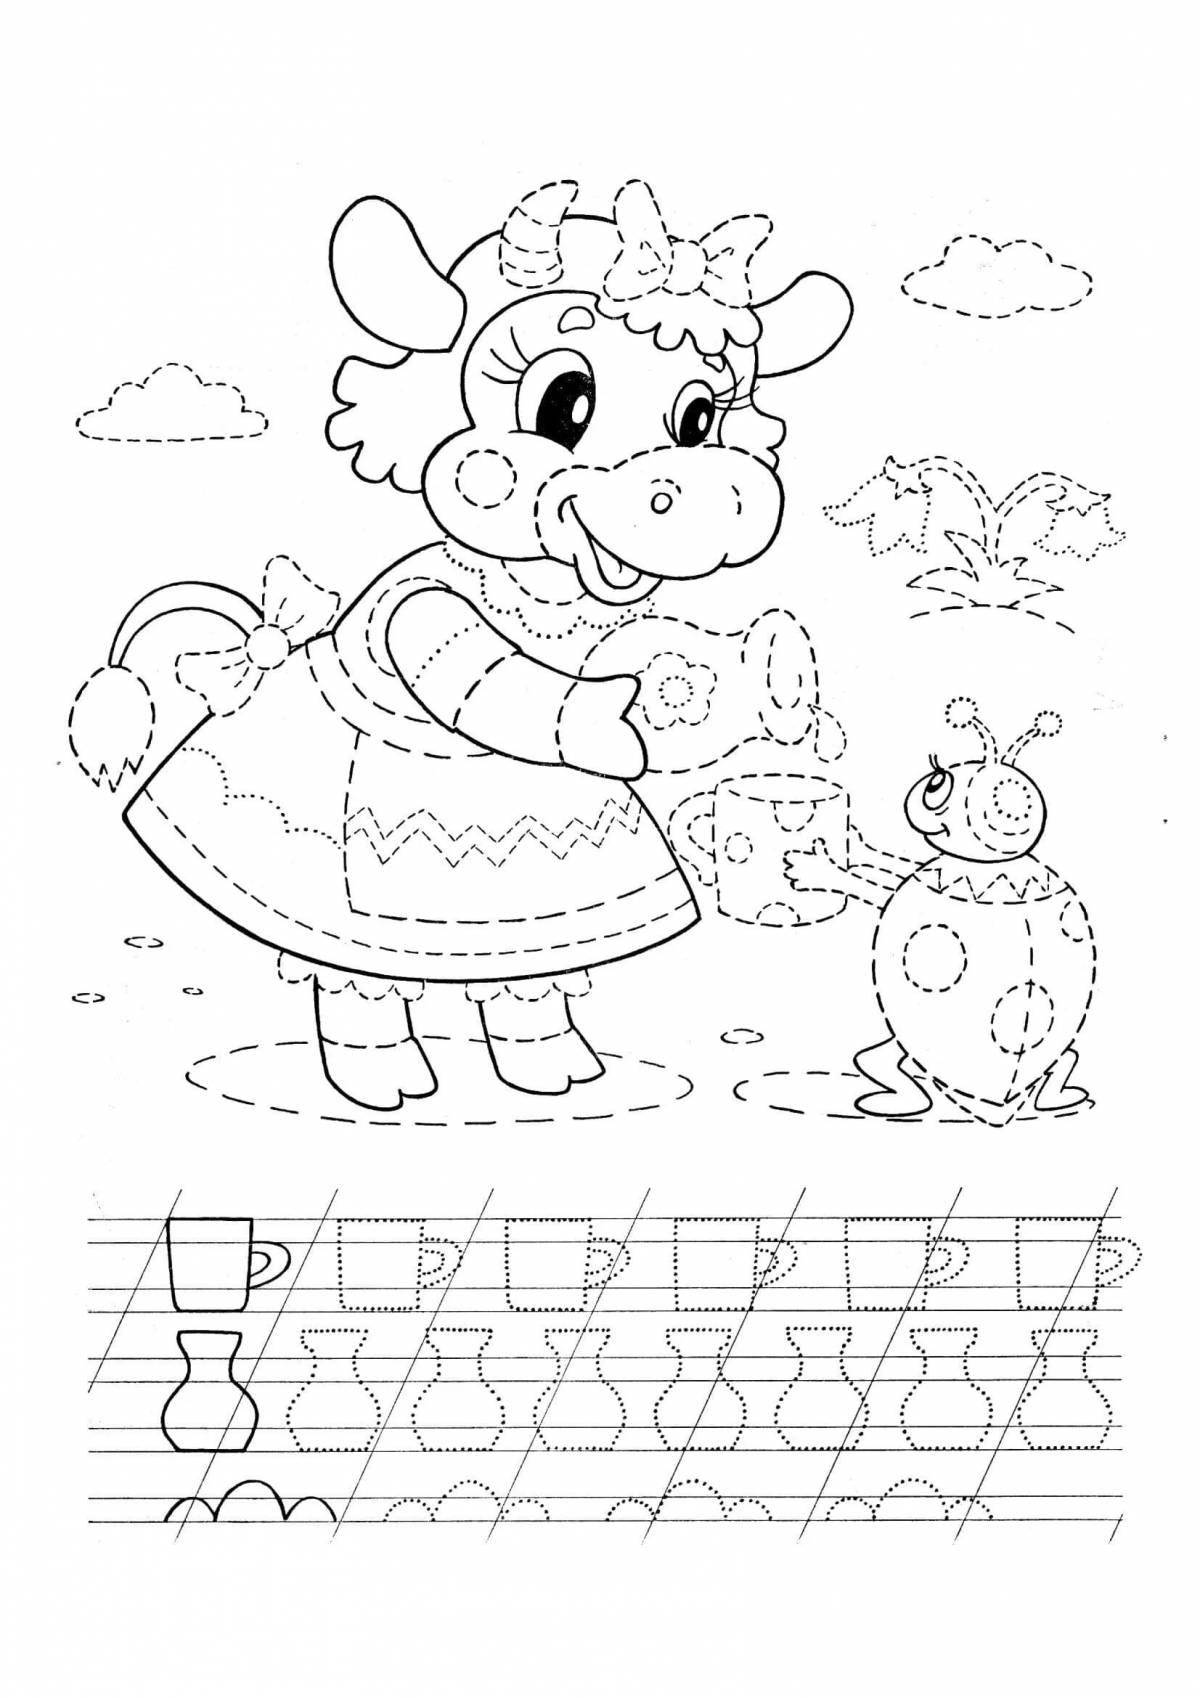 A fun educational coloring book for girls 5-6 years old